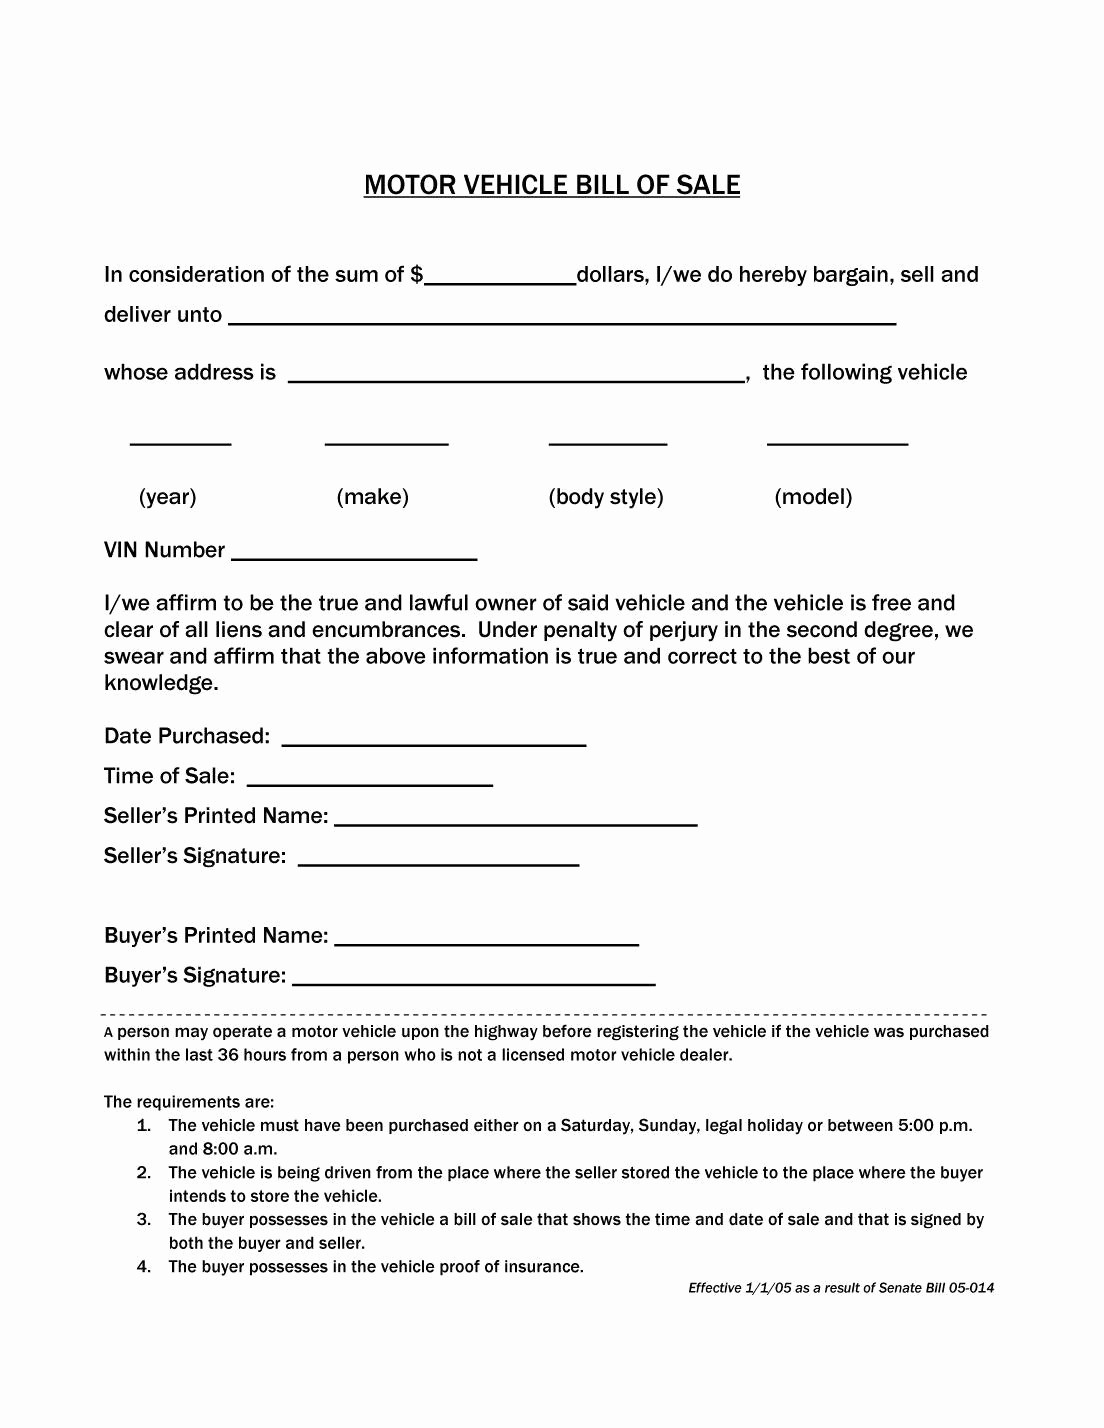 Bill Of Sale Car Free Awesome 45 Fee Printable Bill Of Sale Templates Car Boat Gun